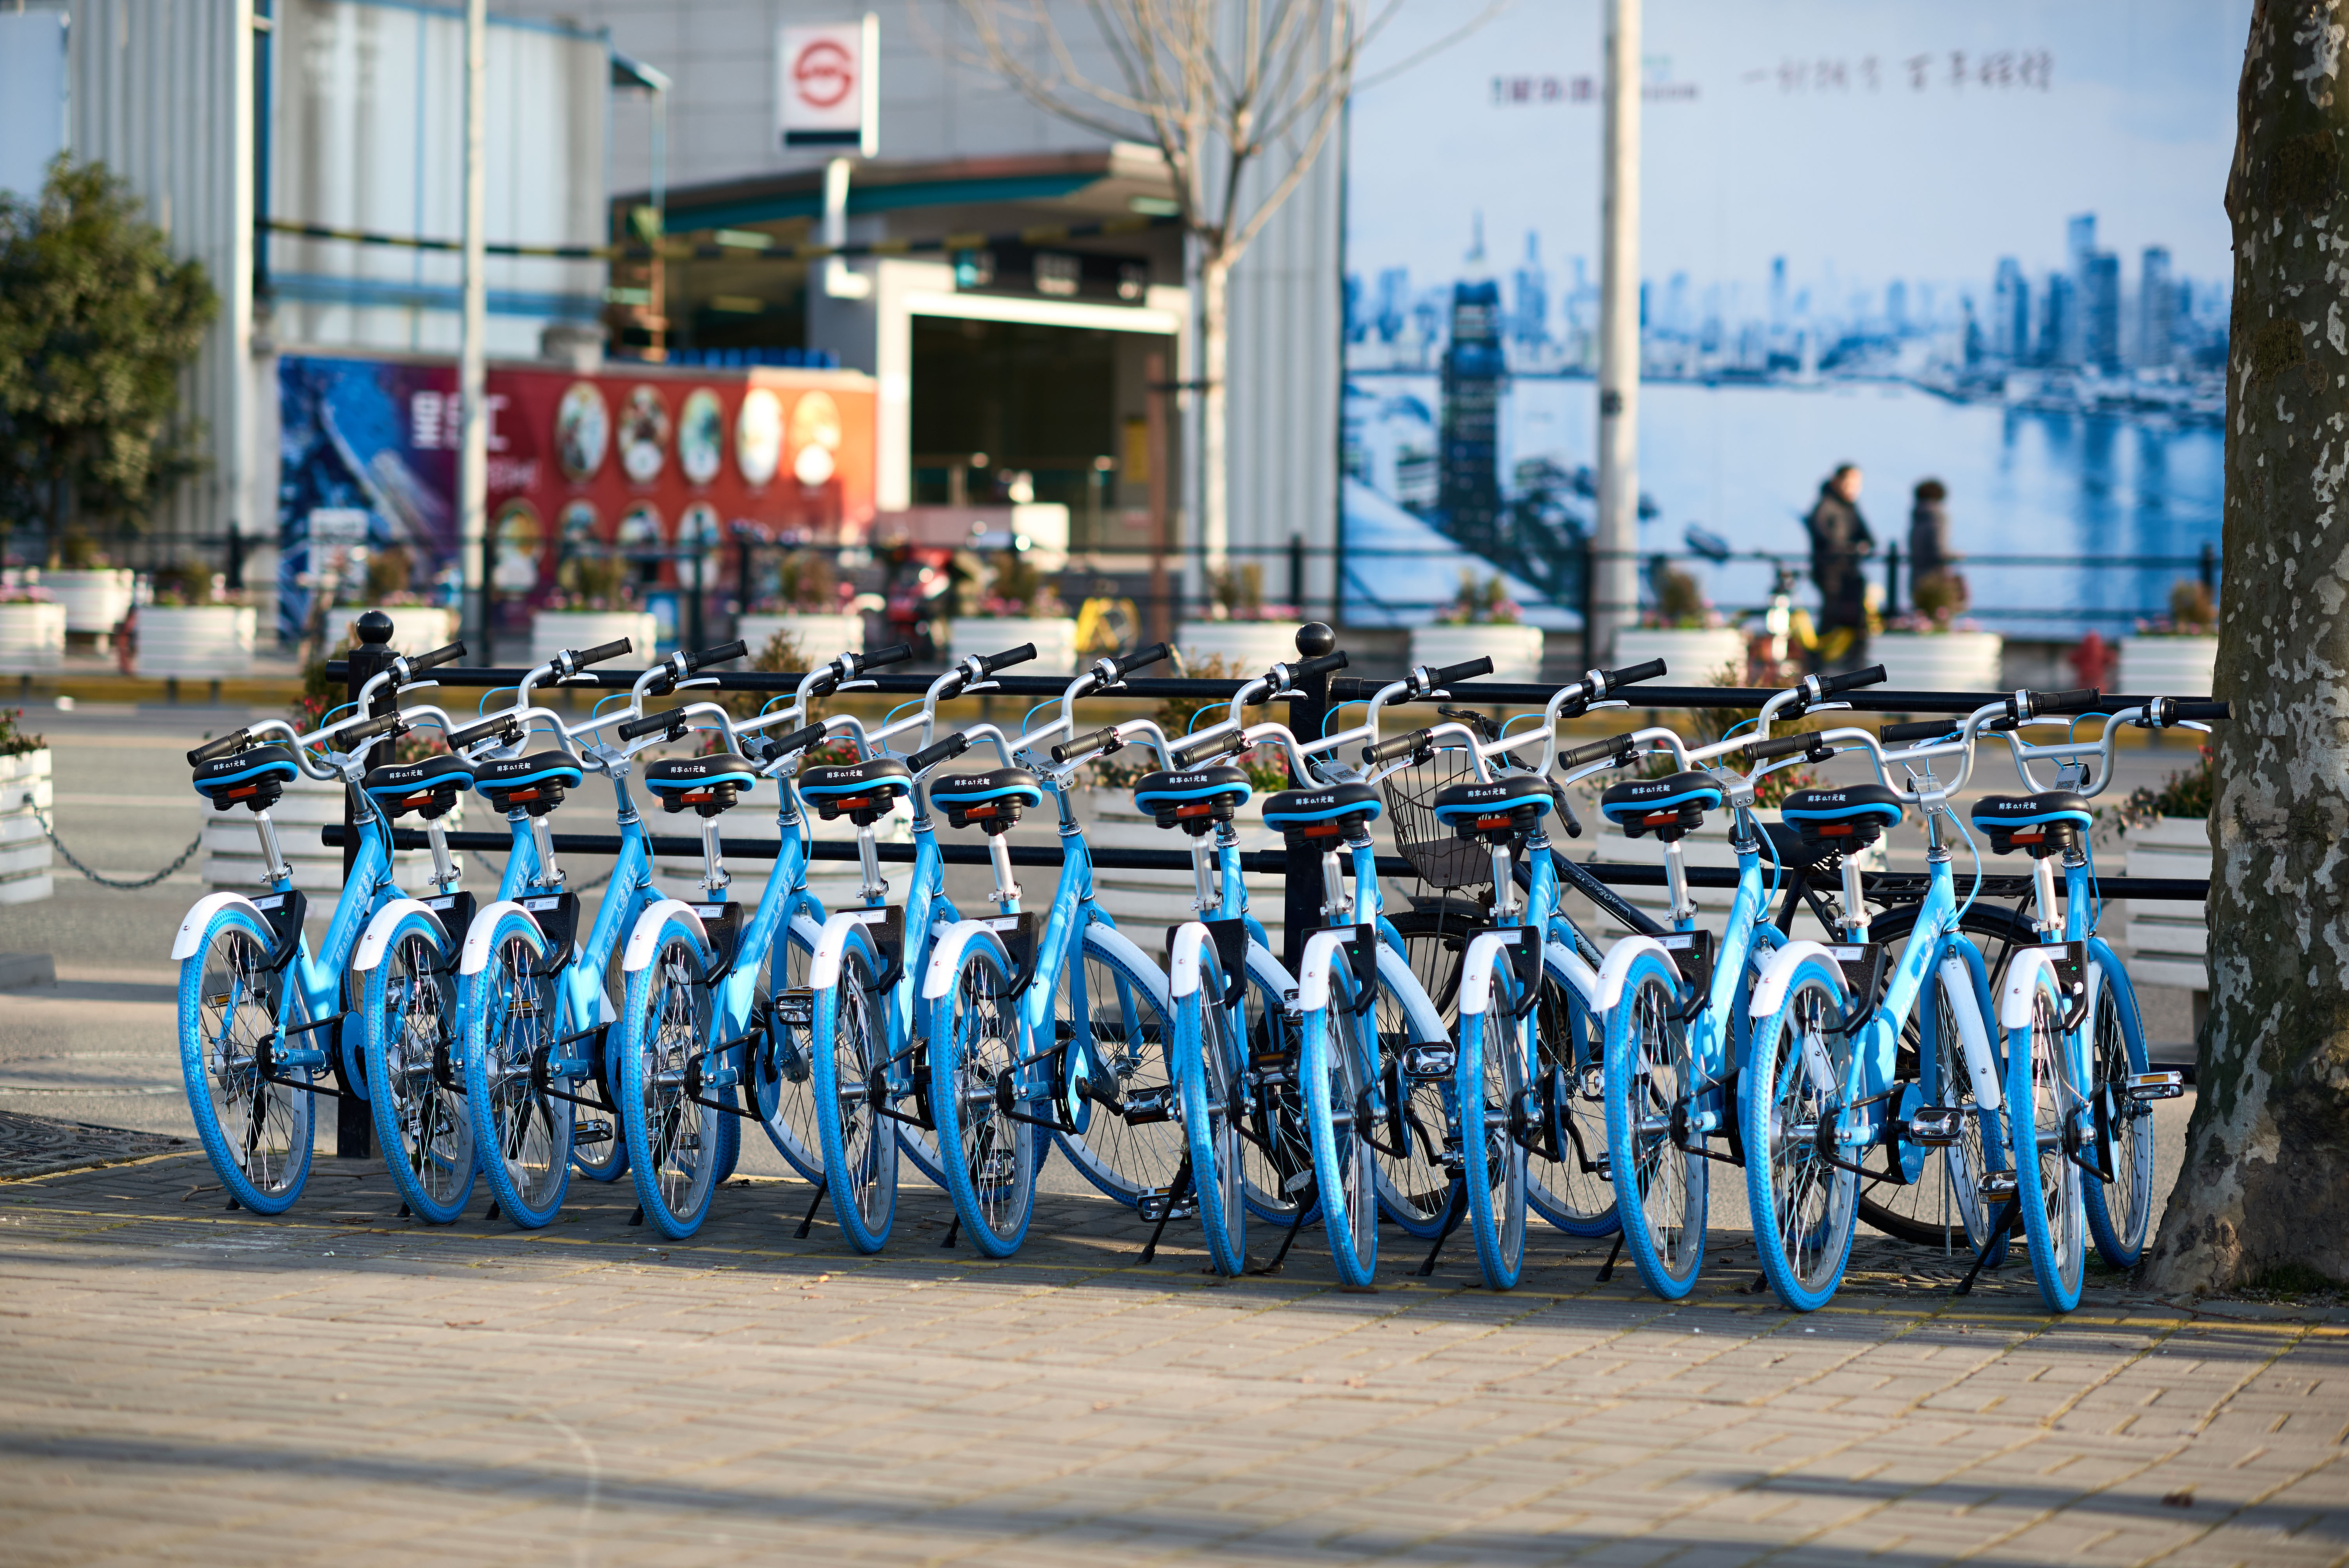 The rapid growth of bike sharing in China